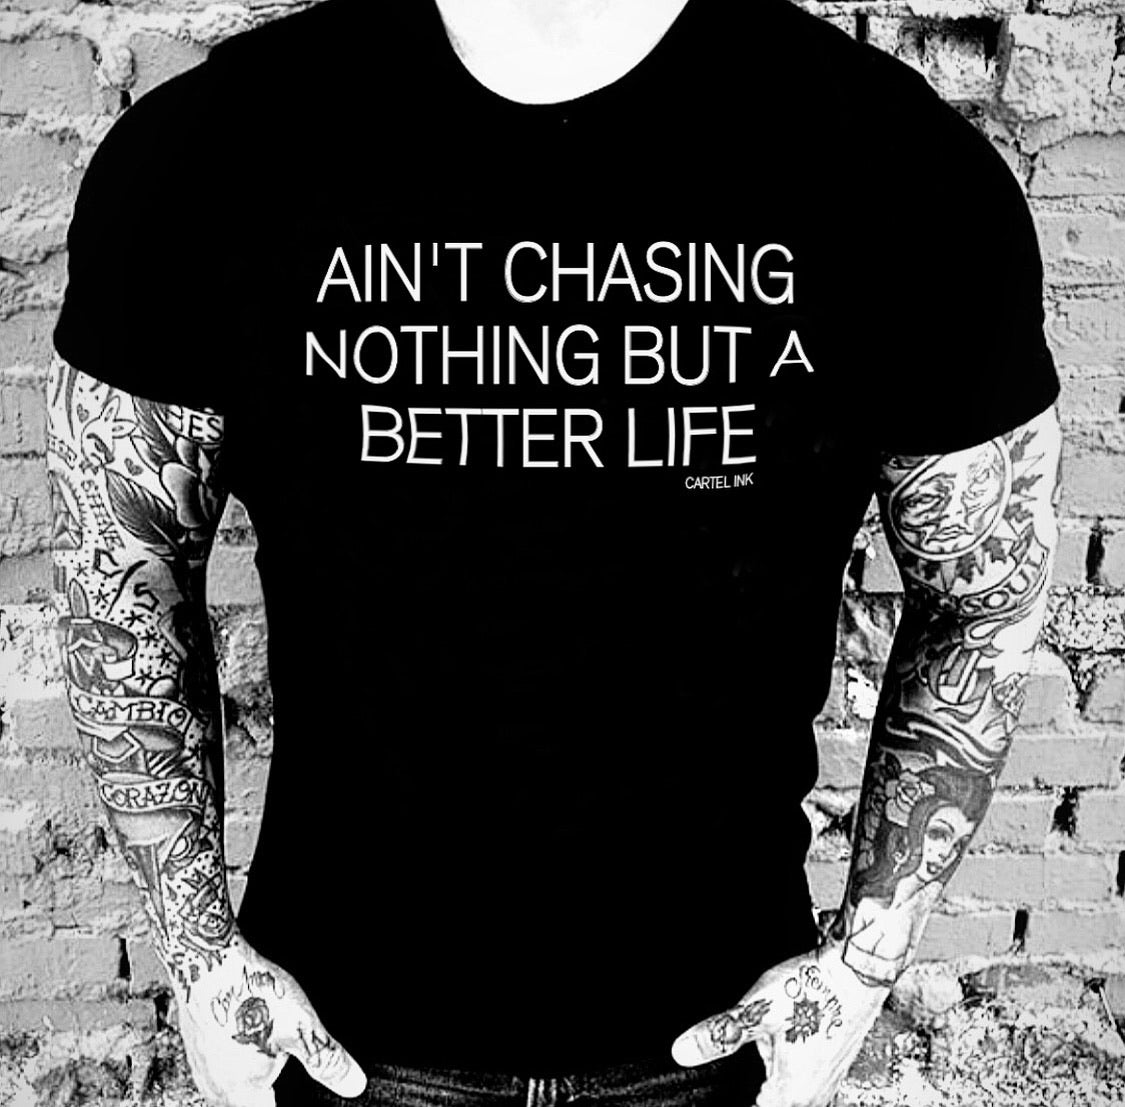 ain't chasing nothing but a better life